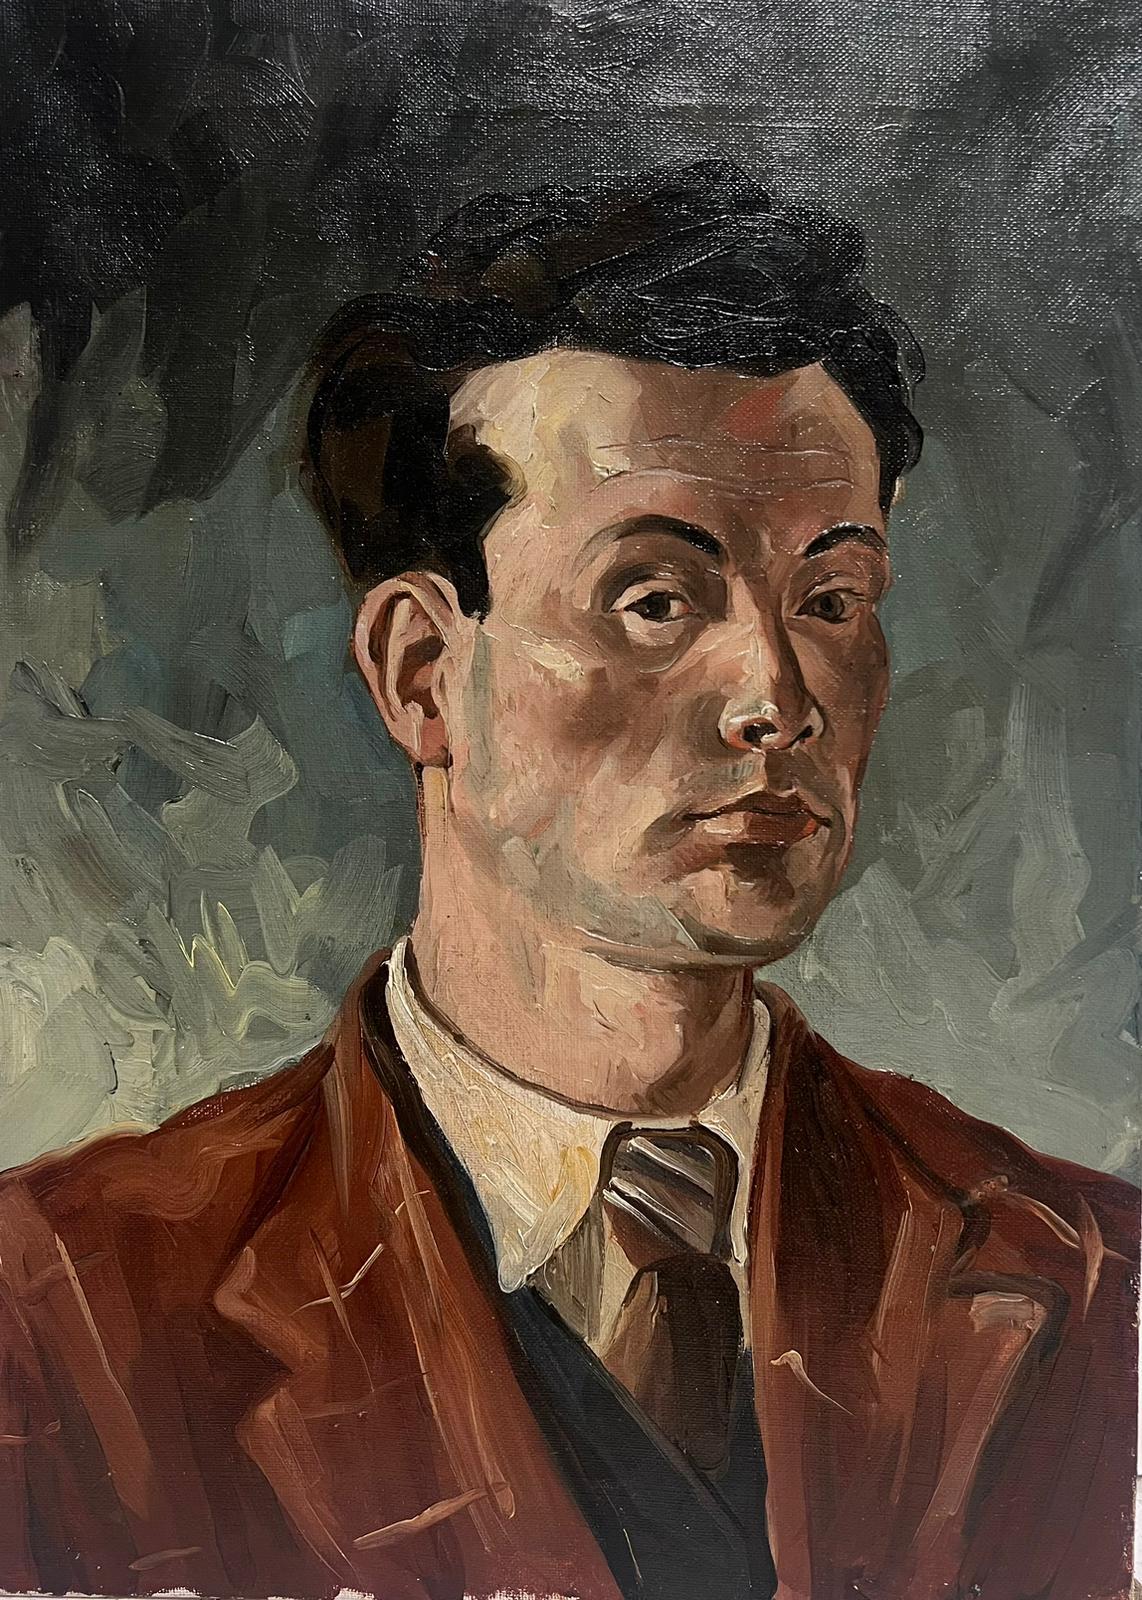 Roger Allain Figurative Painting - 1940's French Oil Painting Portrait of a Man in Brown Jacket & Tie